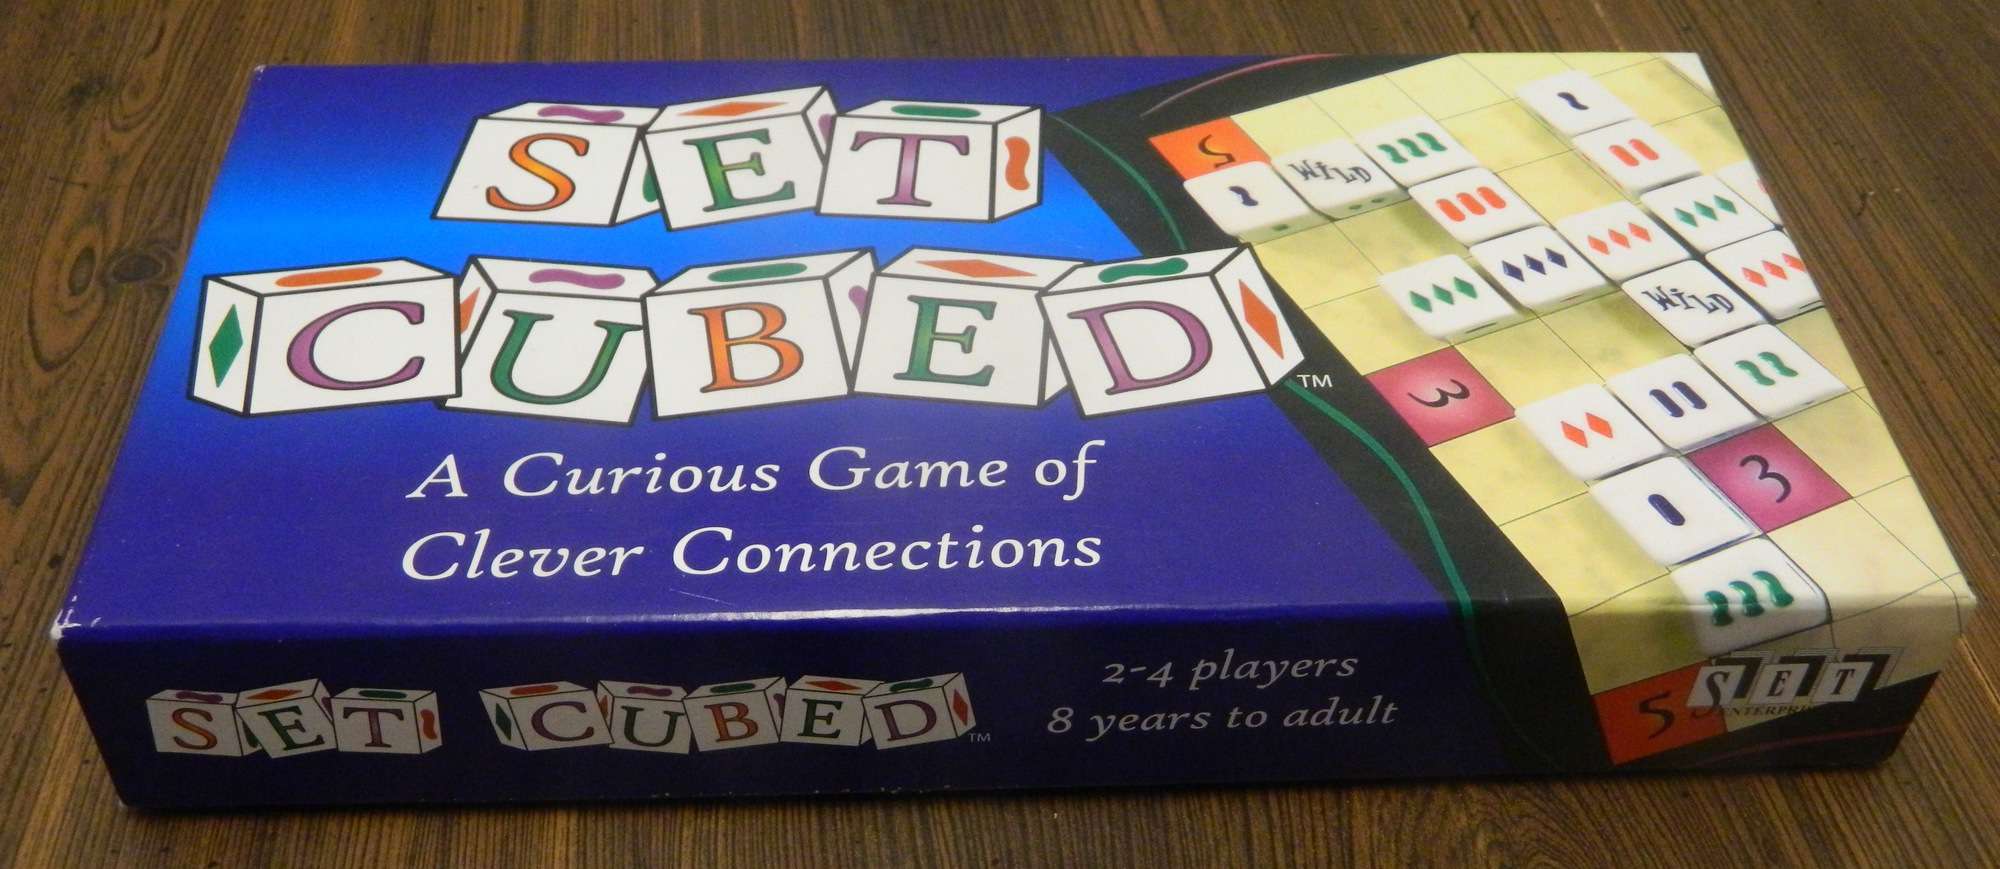 Set Cubed Dice Game Review and Instructions